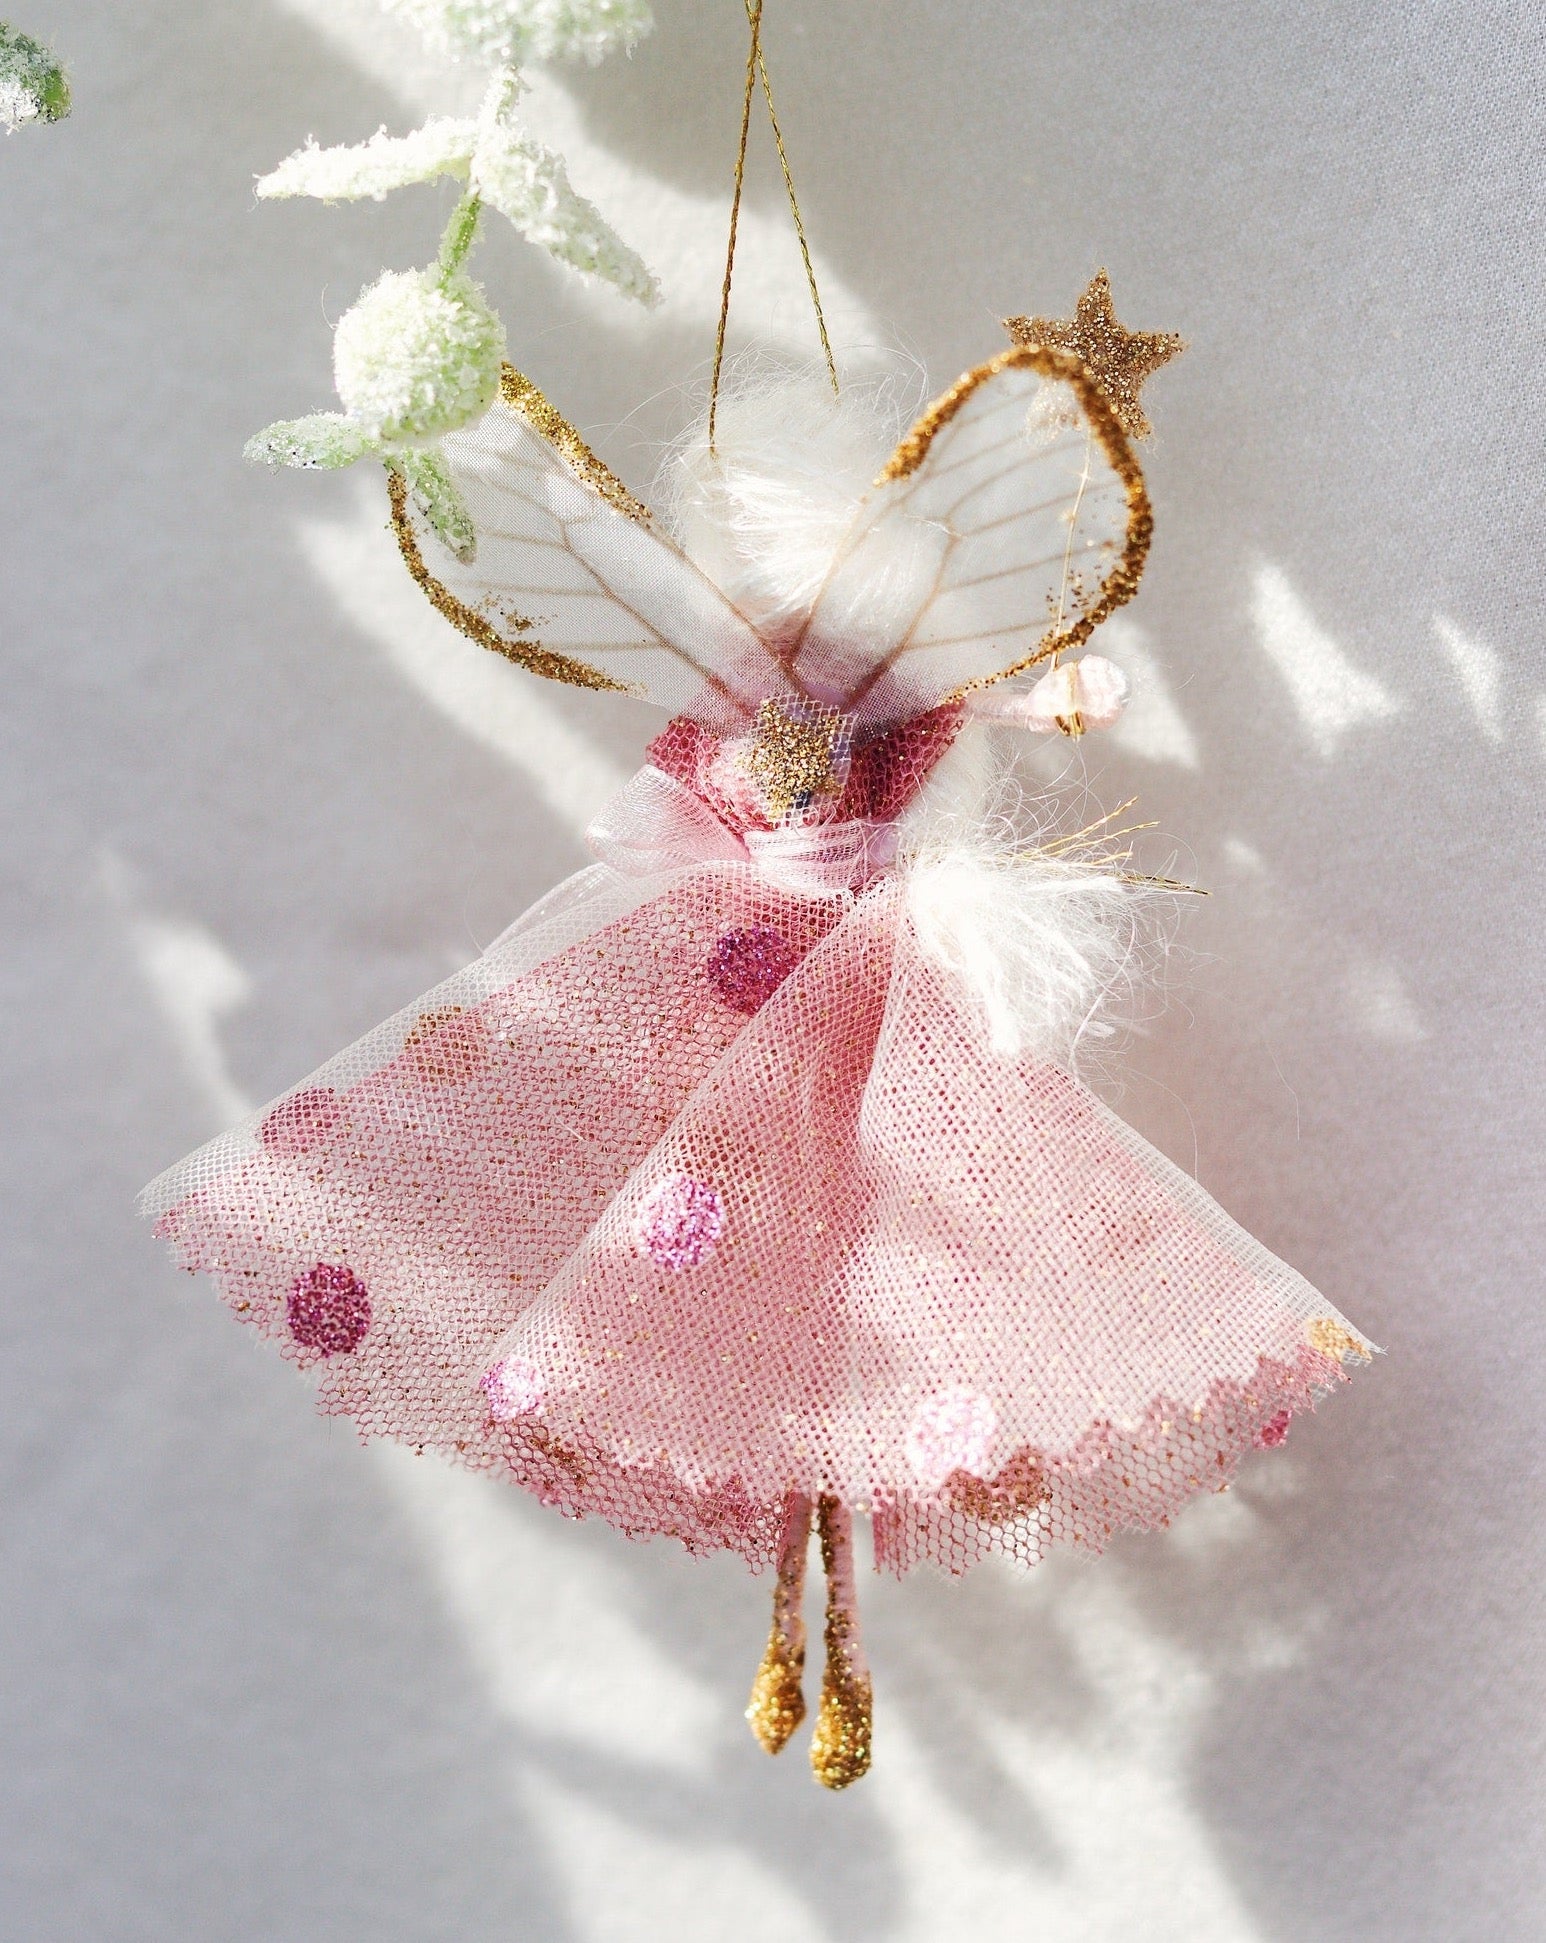 Each Florialice fairy is lovingly created using the cottons, silks, tulle and delicate embellishments, and a magic wand... Every fairy will slightly differ, which gives them their unique character. Their wings are made from the Silk Organza, which really does make the fairies come to life!